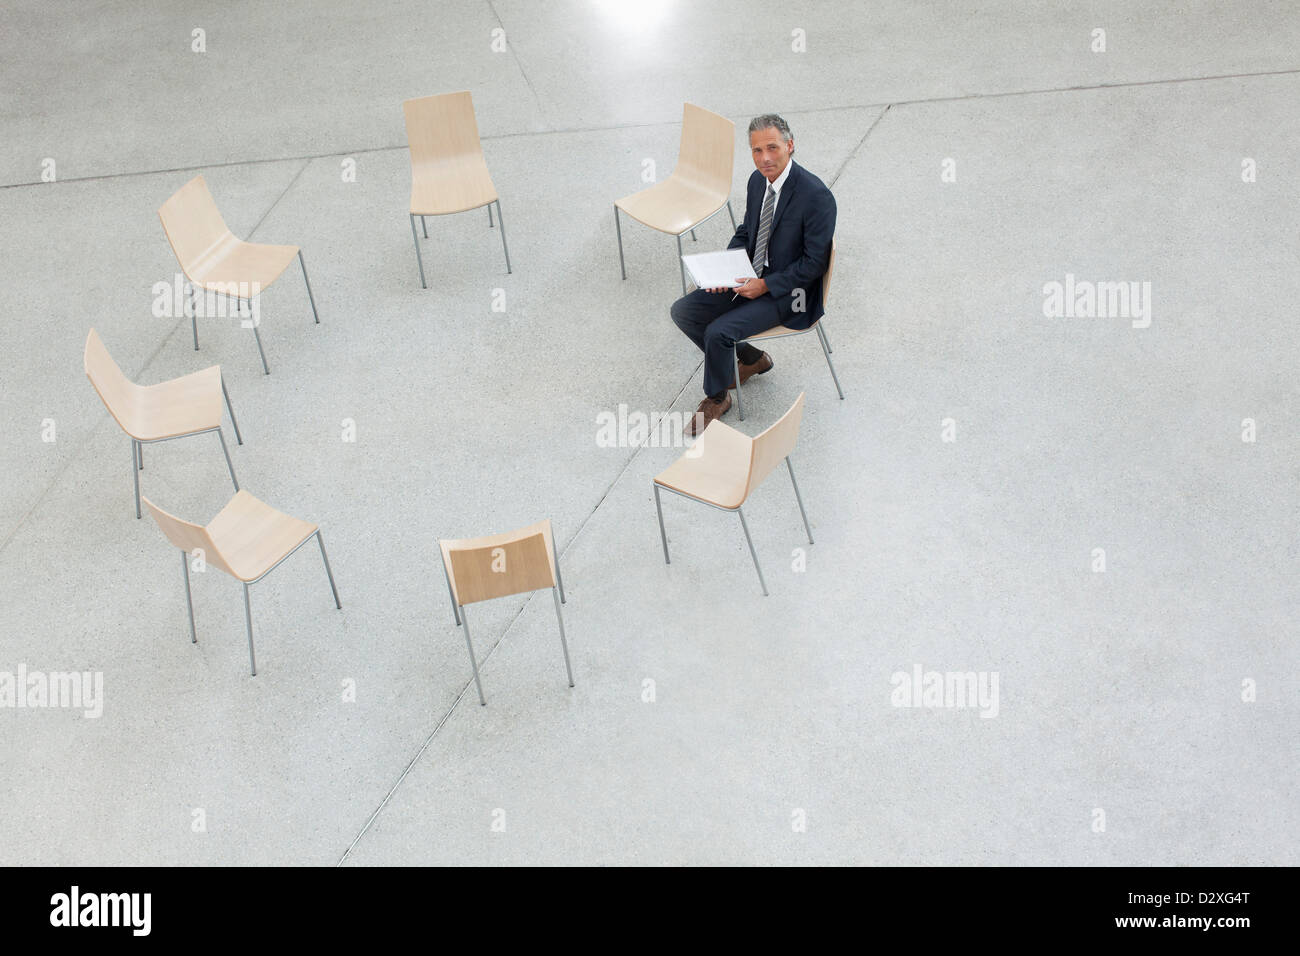 Portrait of smiling businessman sitting in circle of chairs Stock Photo